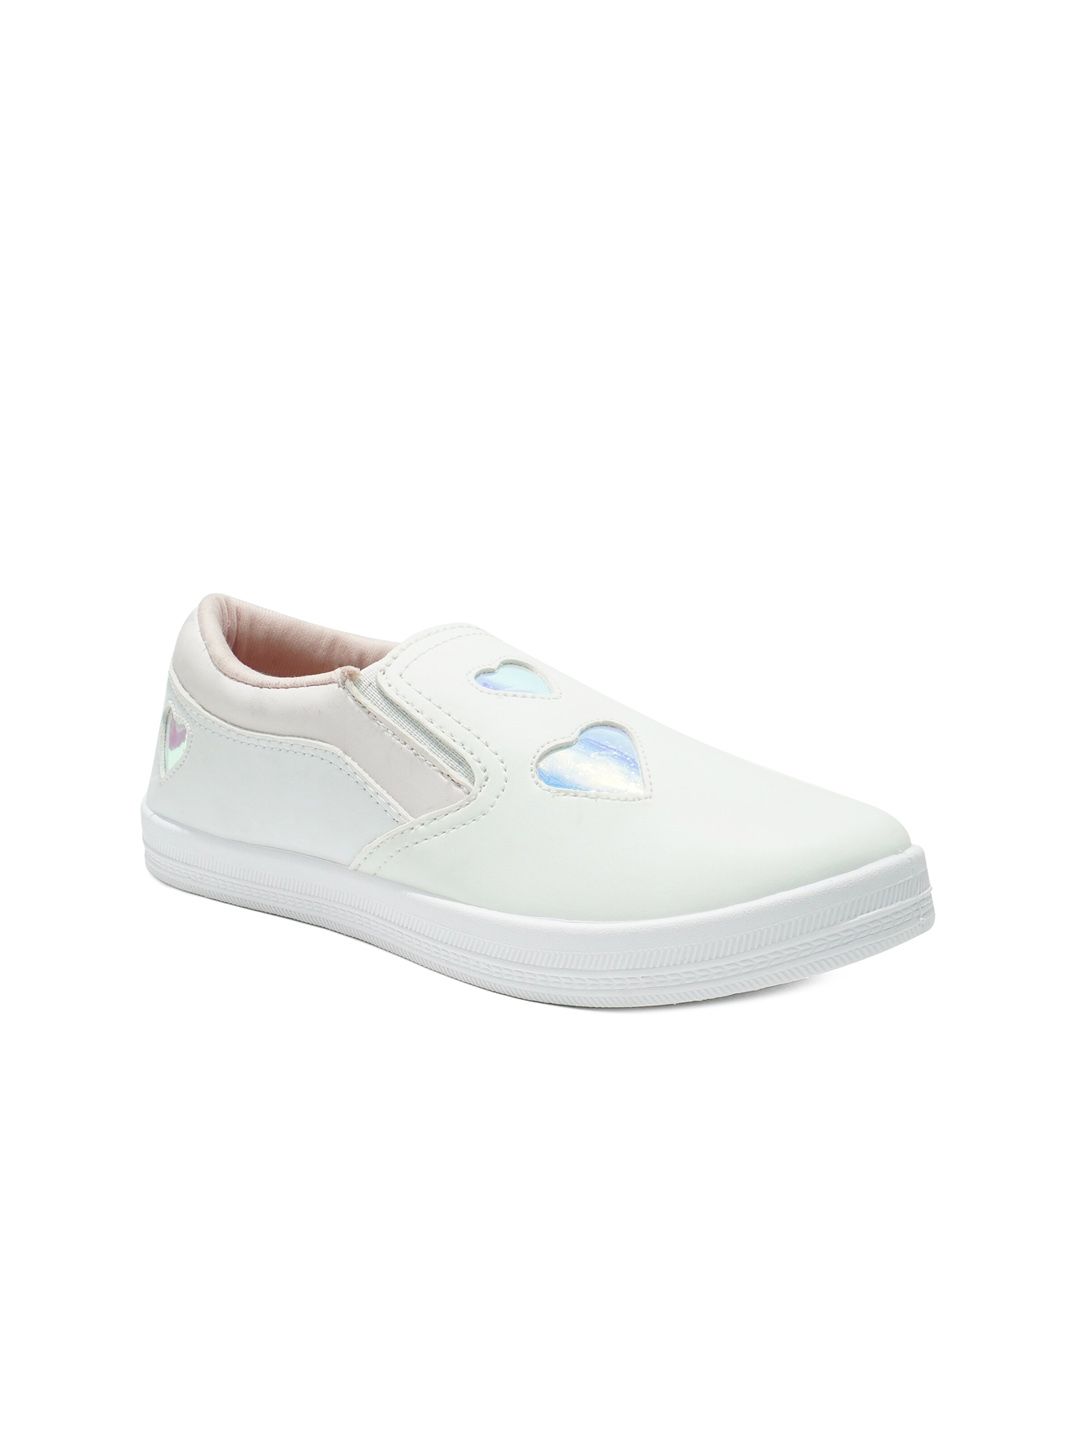 ASIAN Women Textured Color Changing Lightweight Basics Slip-On Sneakers Price in India